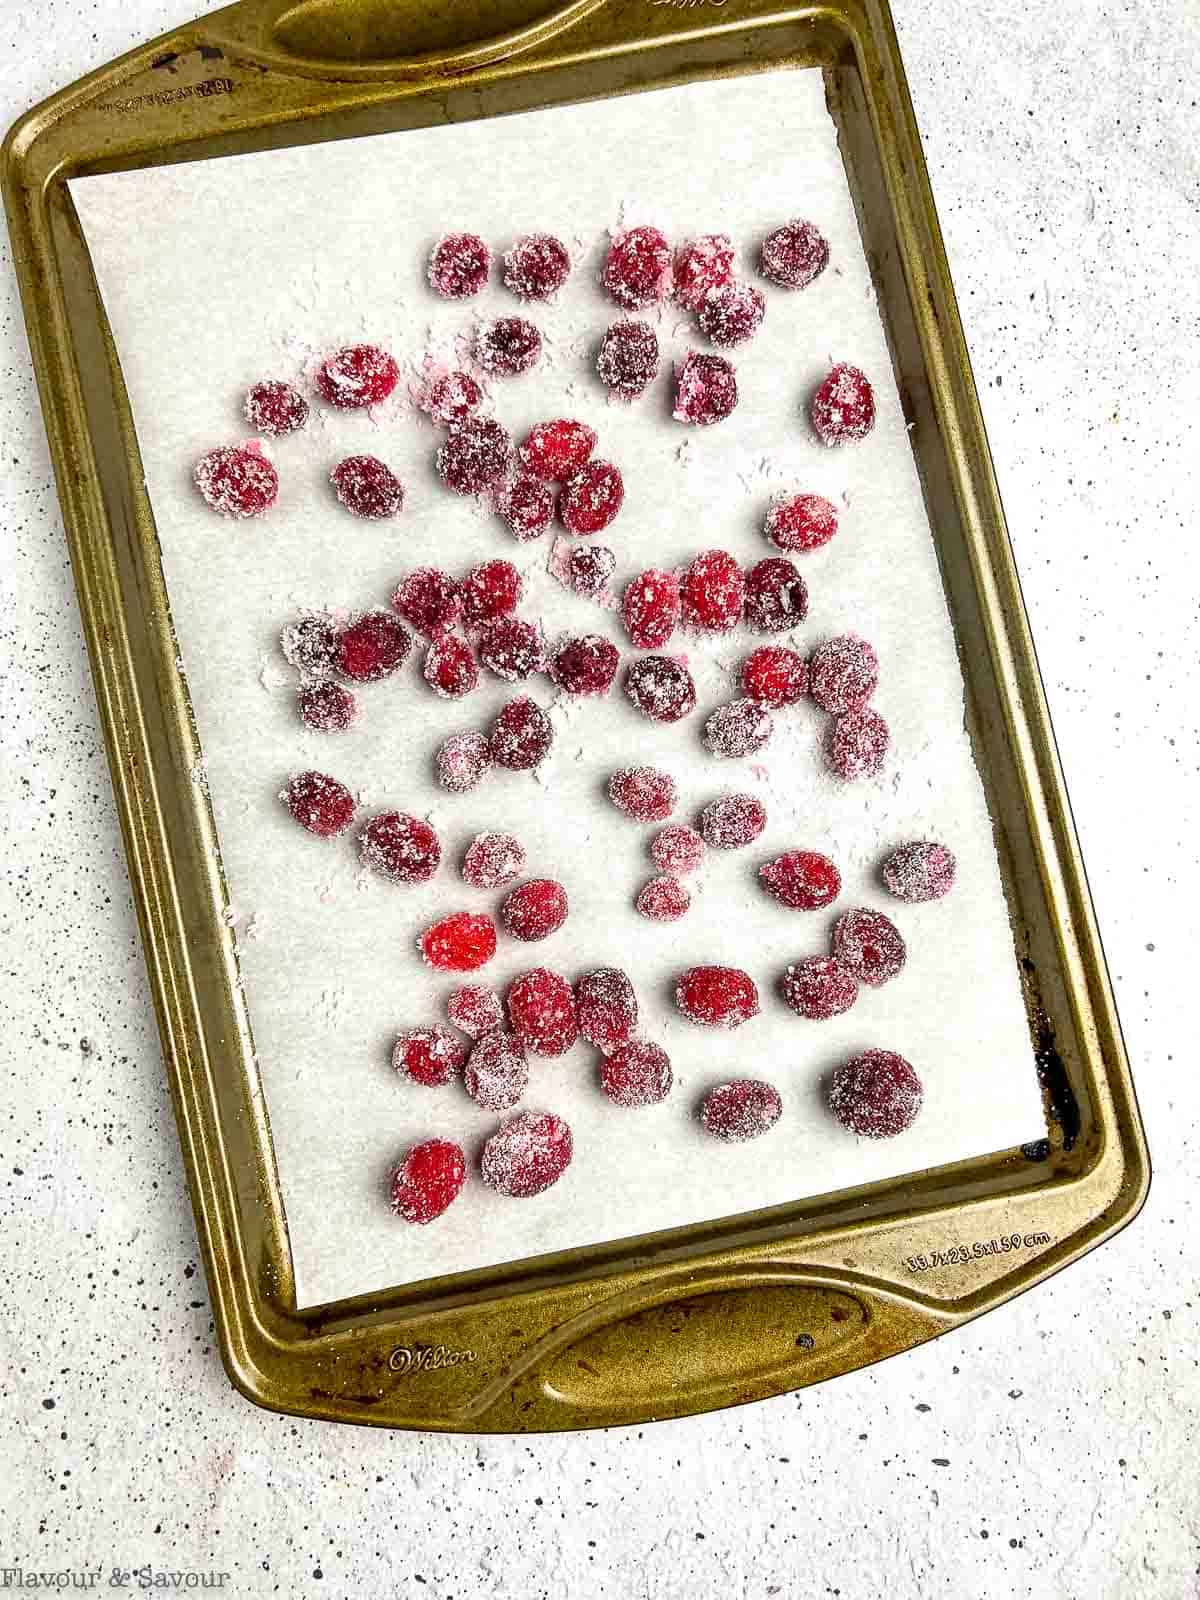 Sugared cranberries drying on a baking sheet.